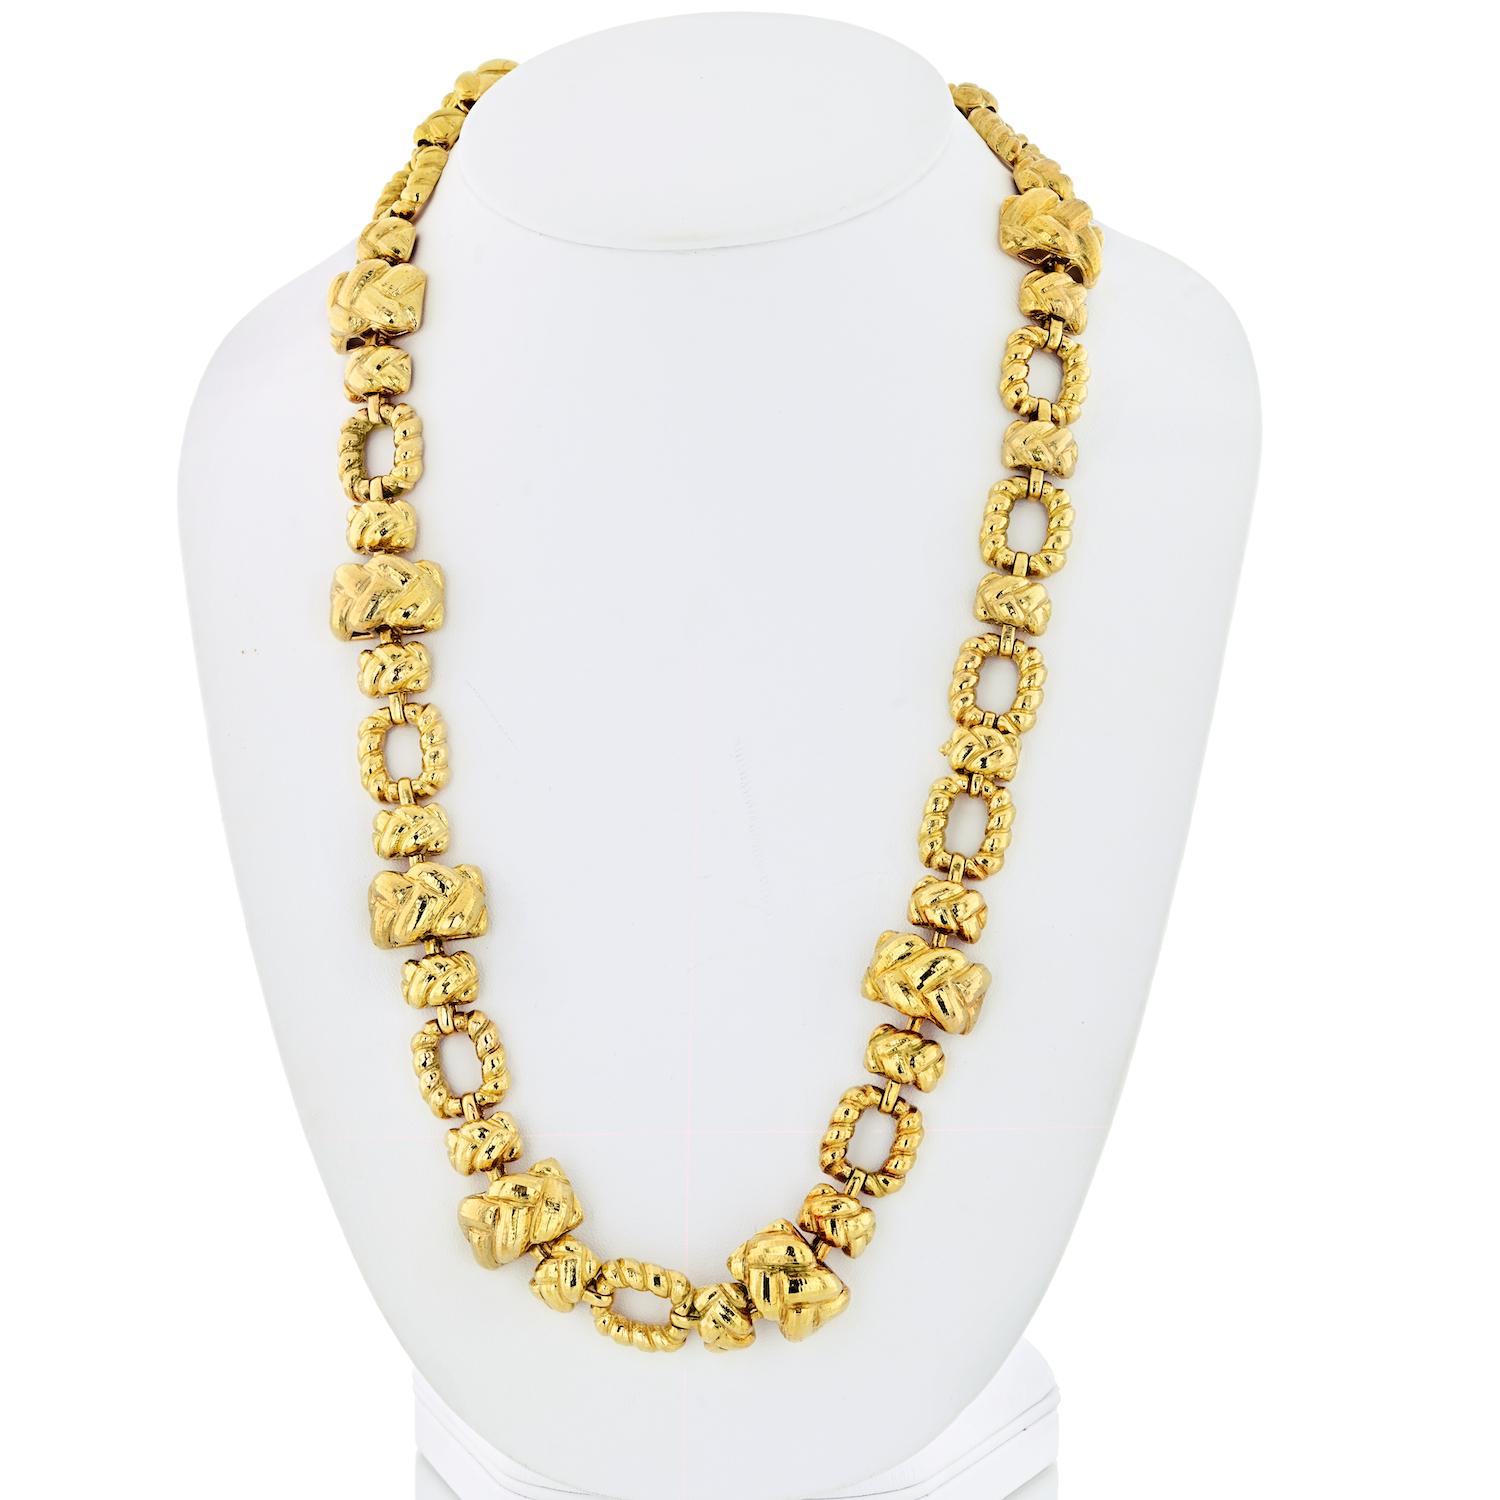 You will love this David Webb 1970's chain link necklace made in 18K Yellow Gold that measures 28 inches. It features chunky links and is very articulated. 

This necklace is not for the fainthearted, of an impressive gold weight this is an